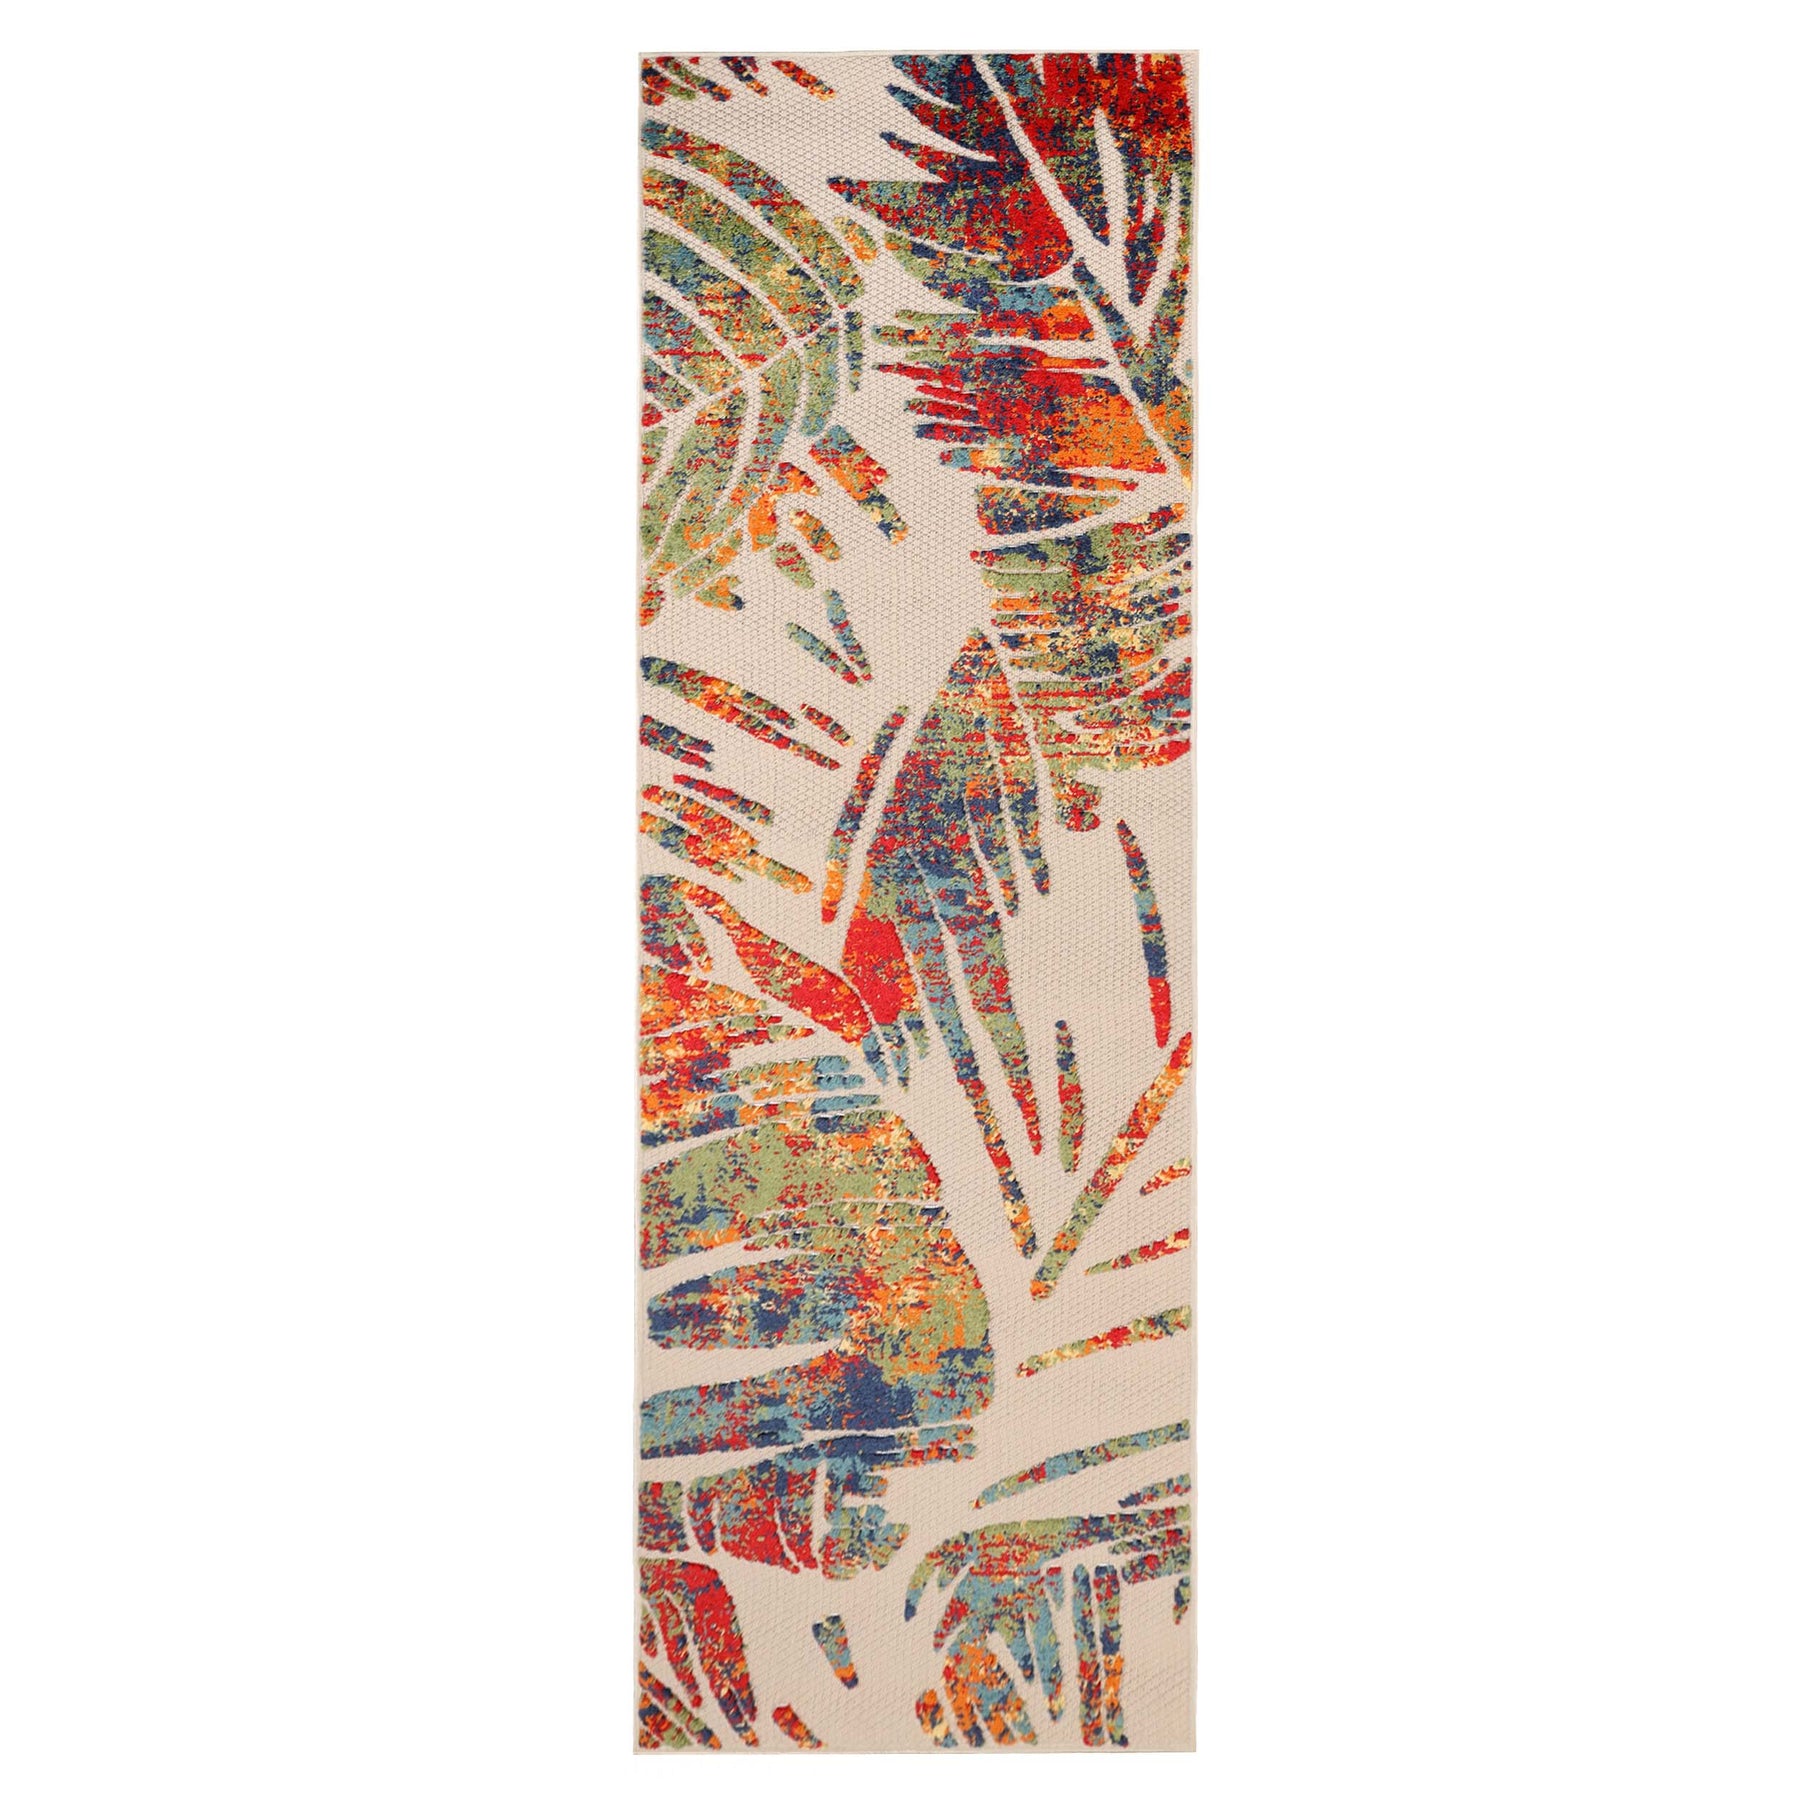 Superior Modern Abstract Botanical Leaves Indoor/Outdoor Area Rug, Slate, 6' x 8' 10